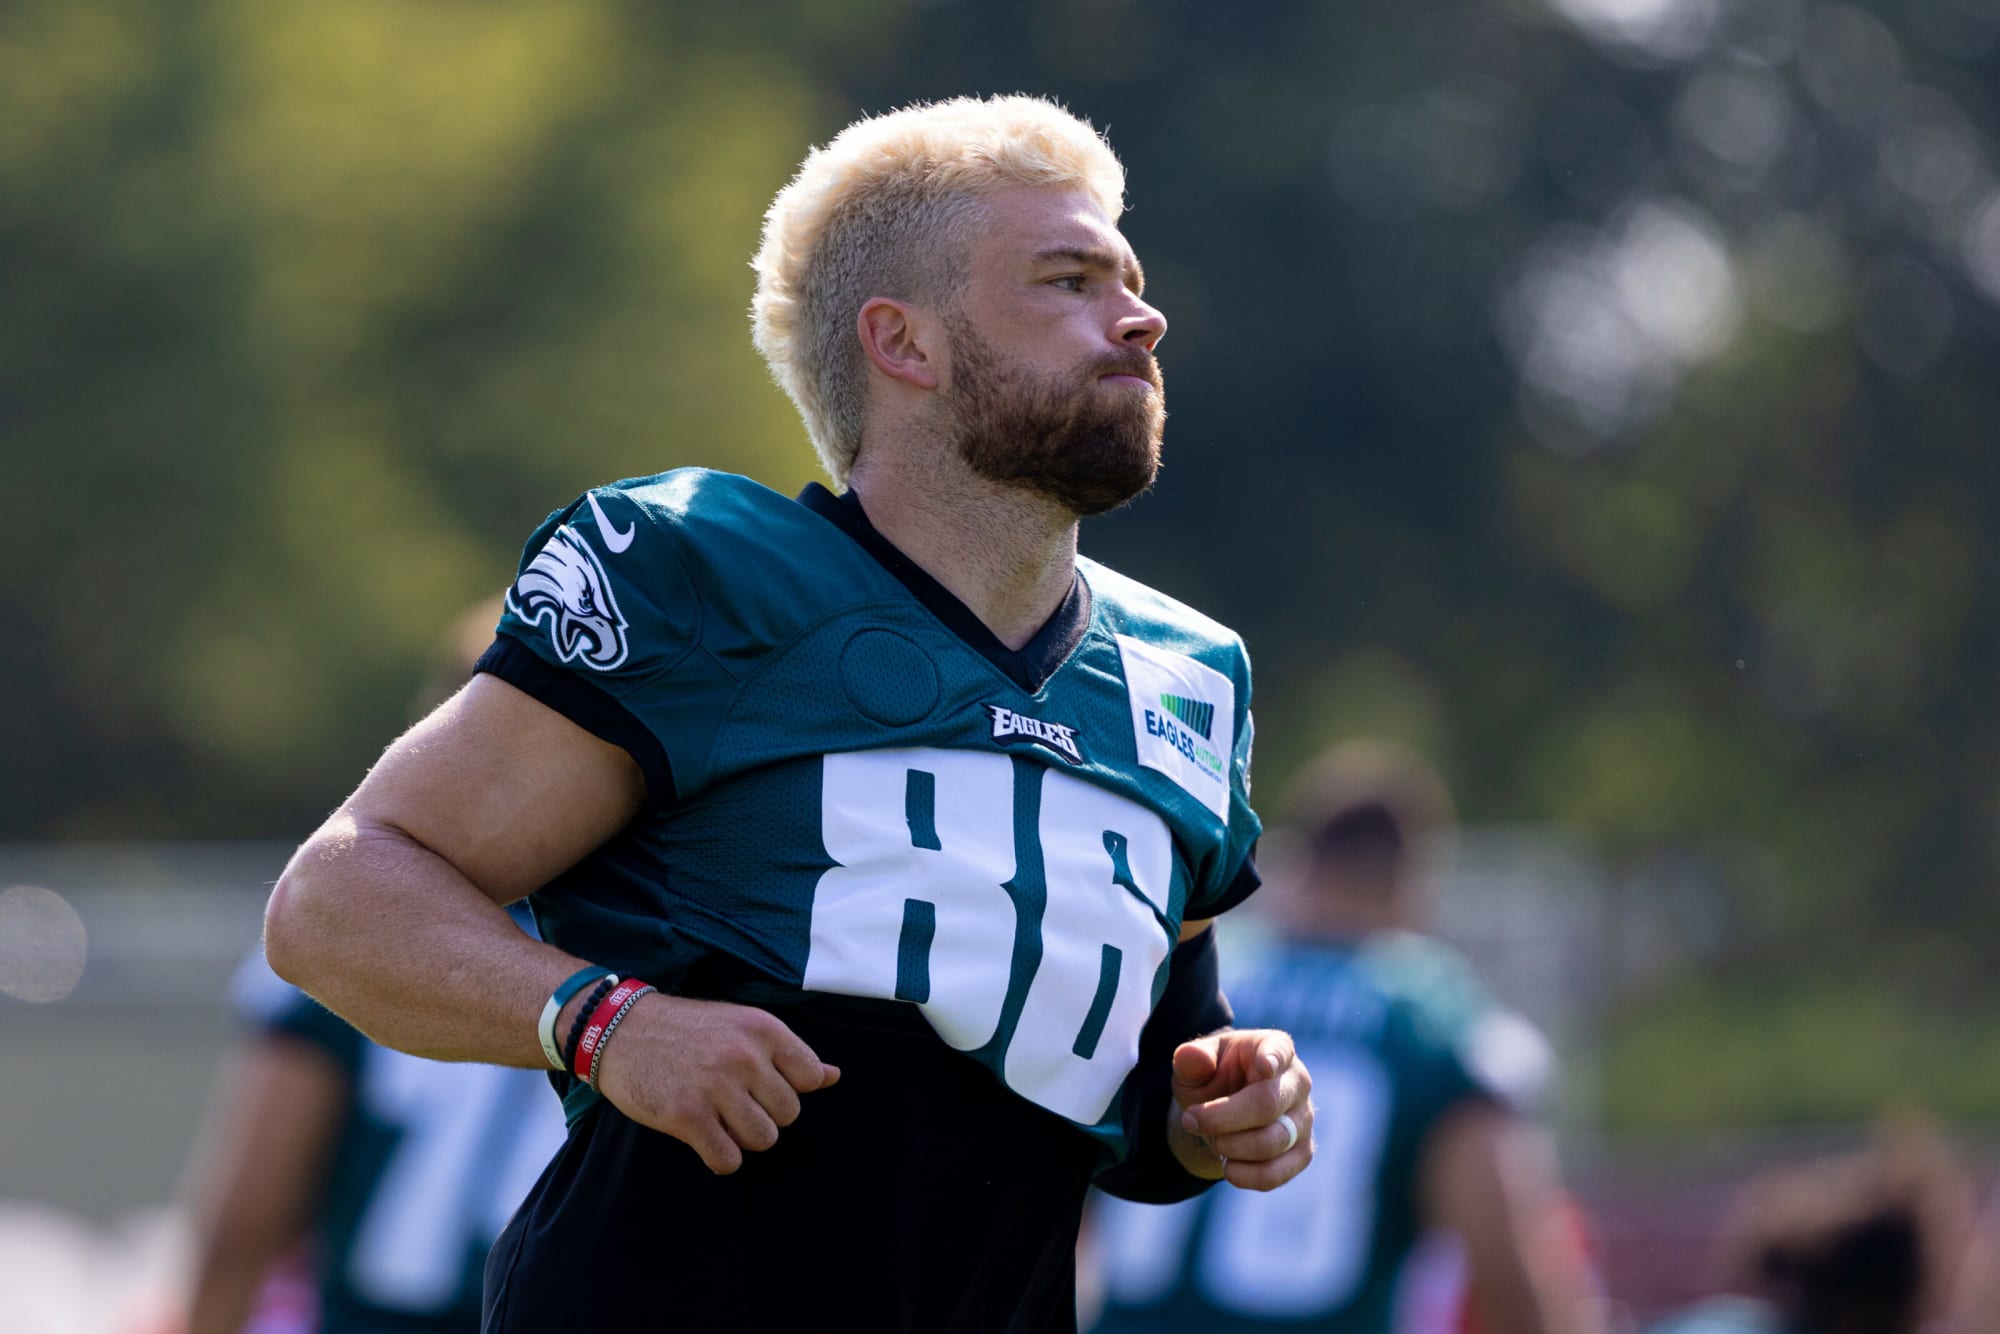 Zach Ertz showed up to Eagles training camp sporting an interesting new